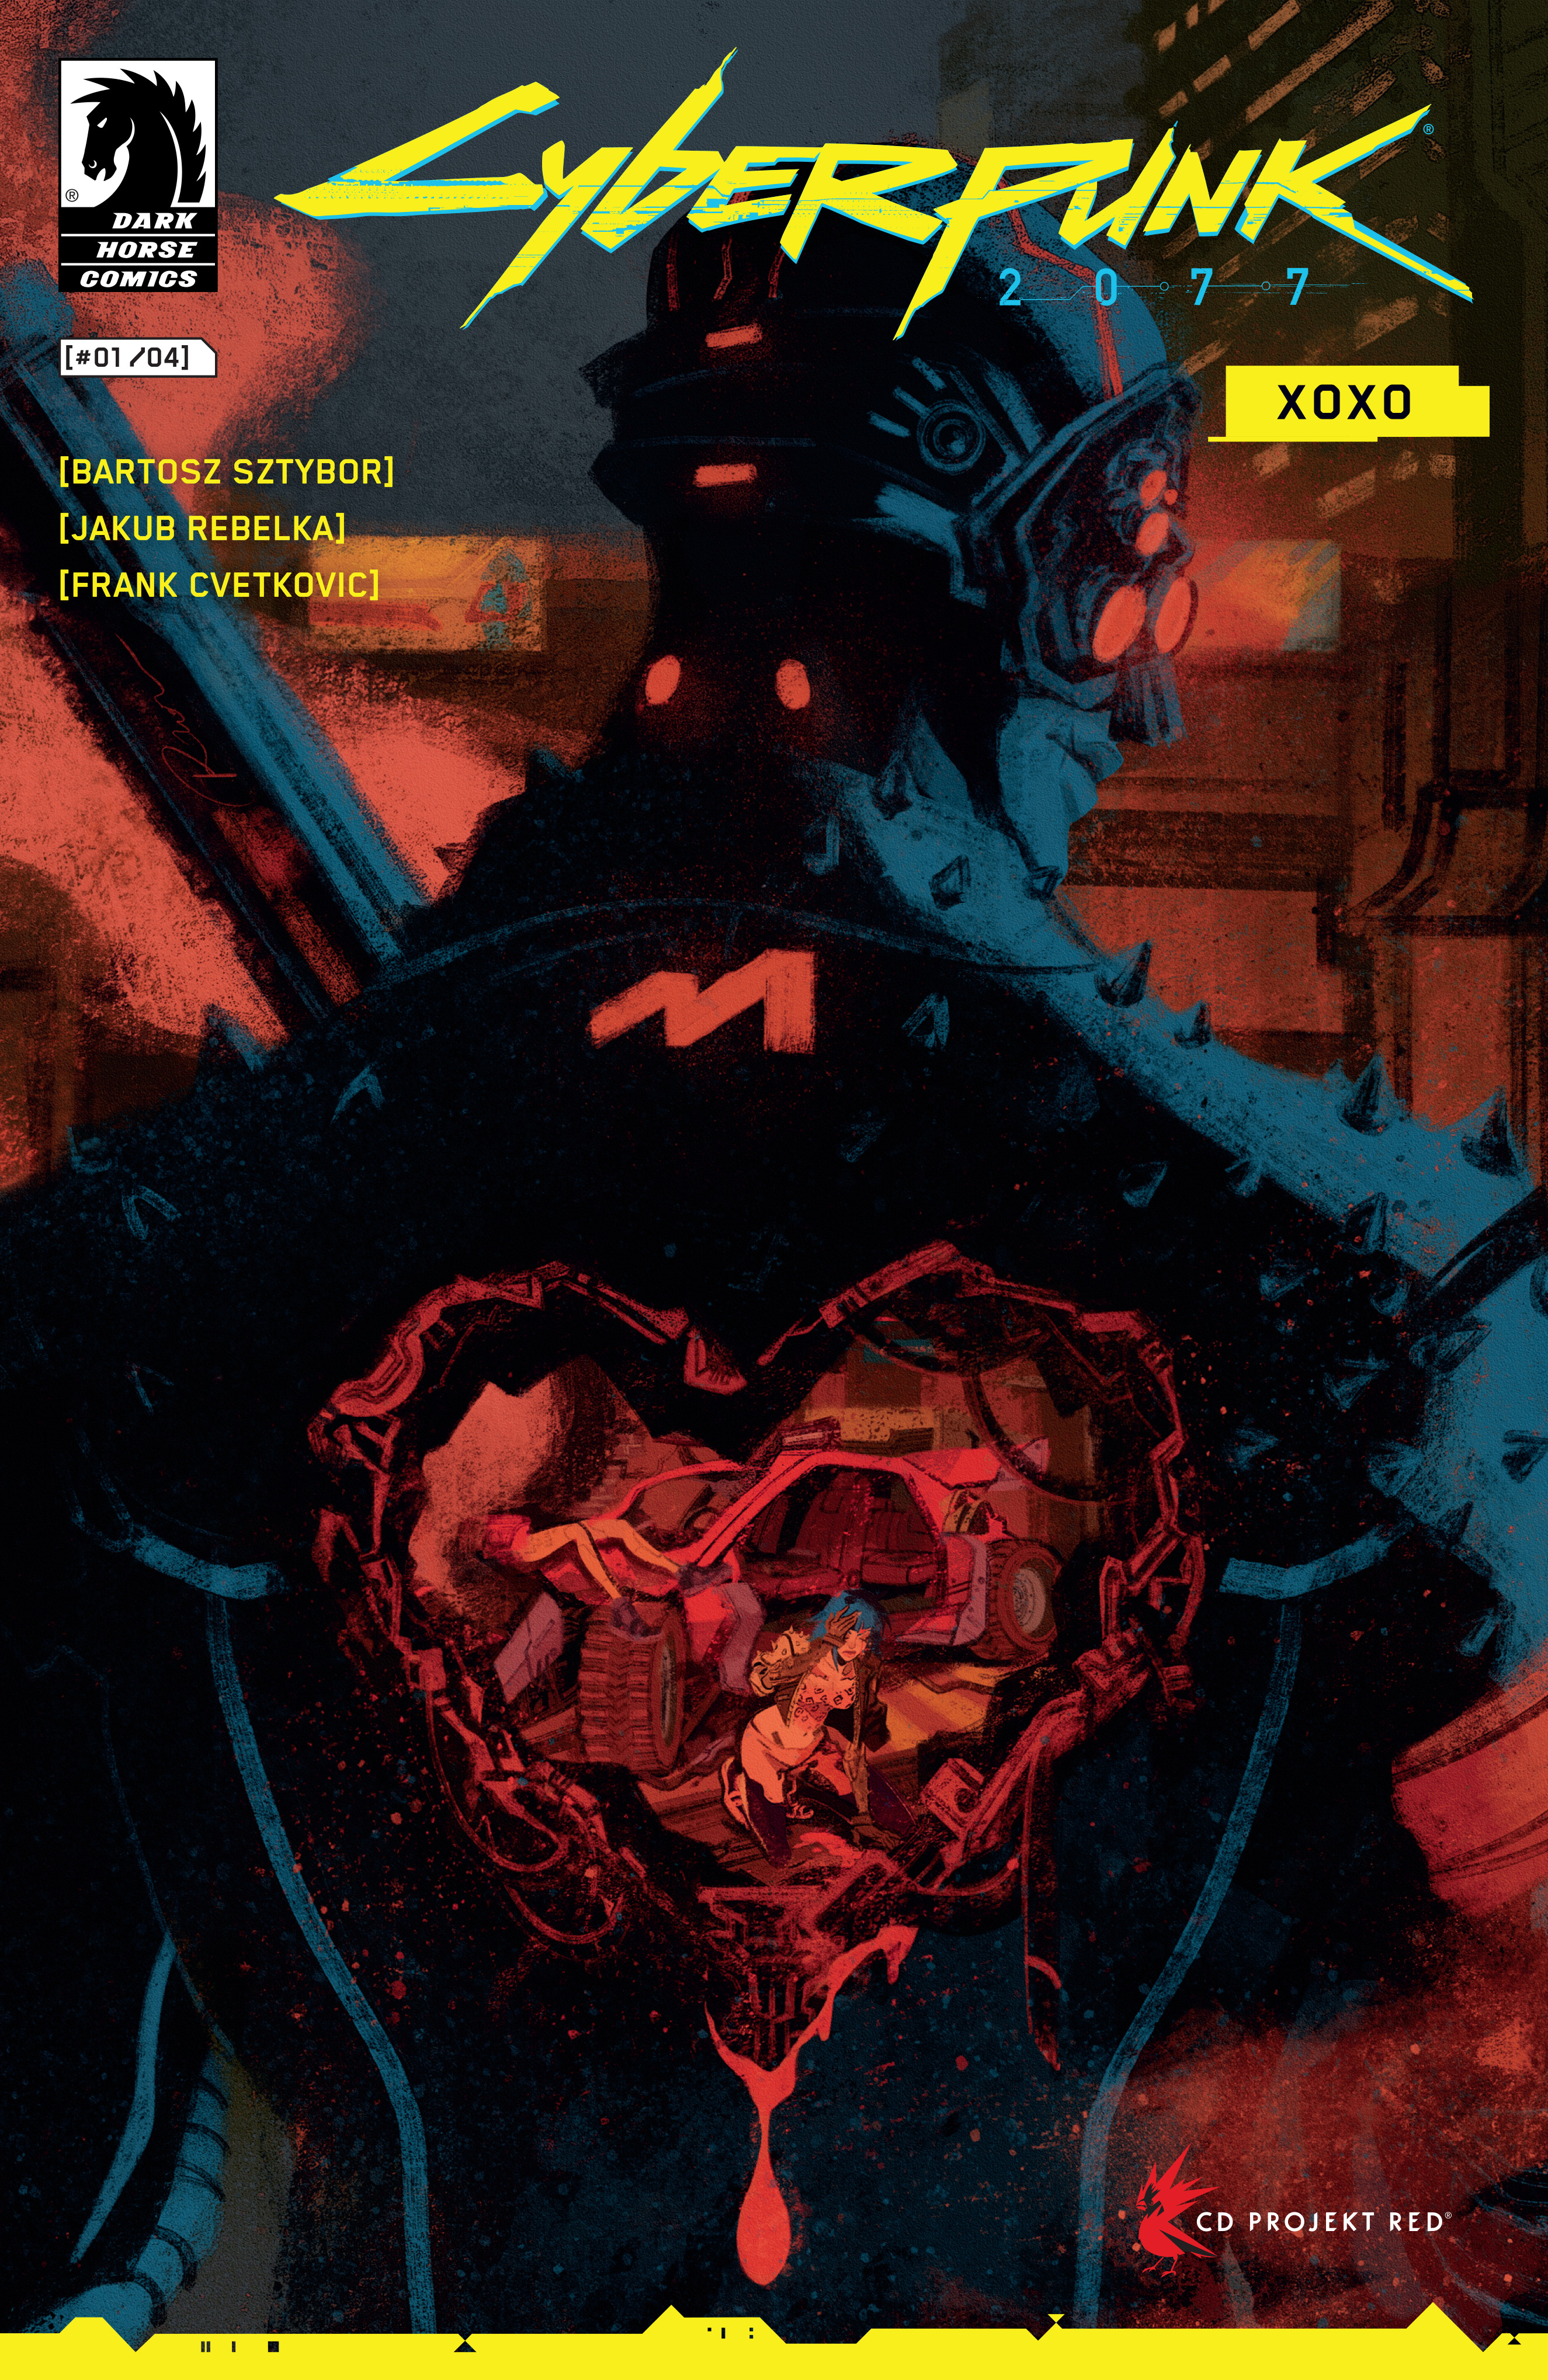 Cover Variant D